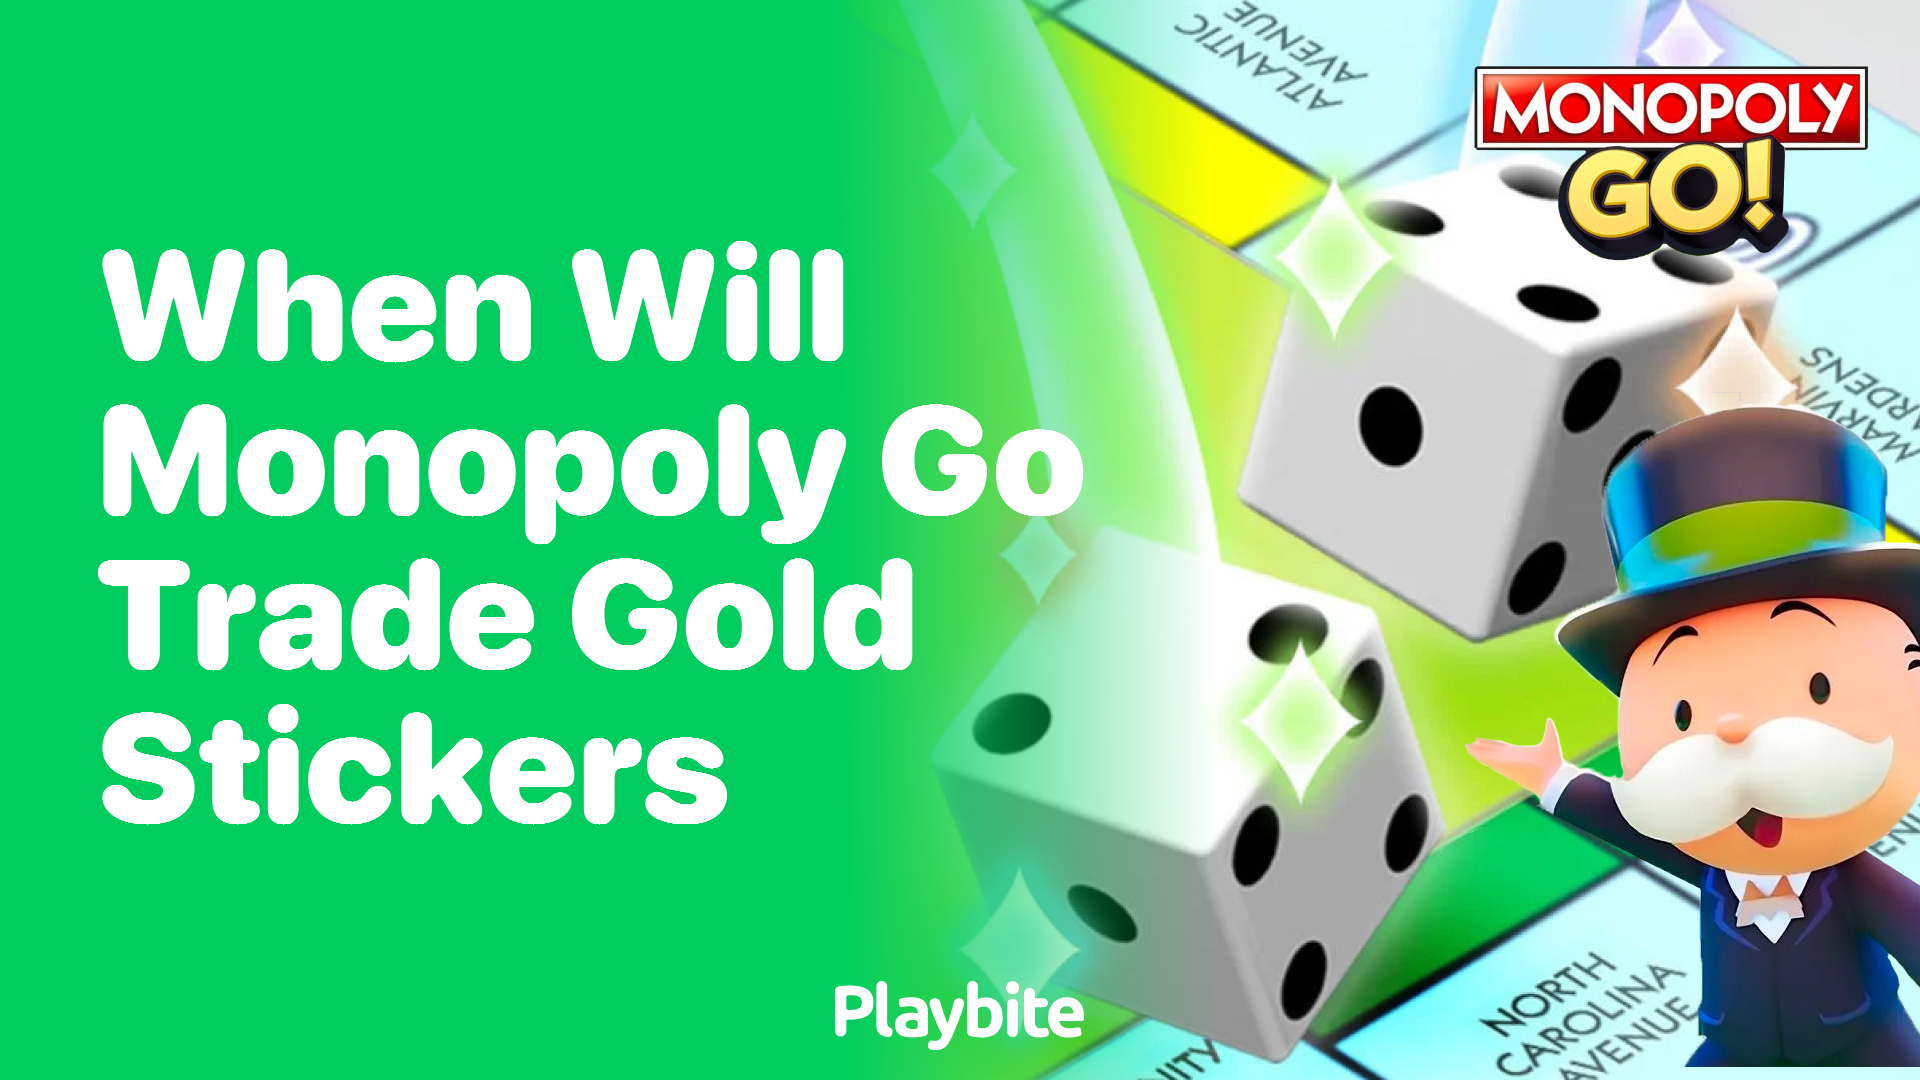 When Will Monopoly Go Trade Gold Stickers?